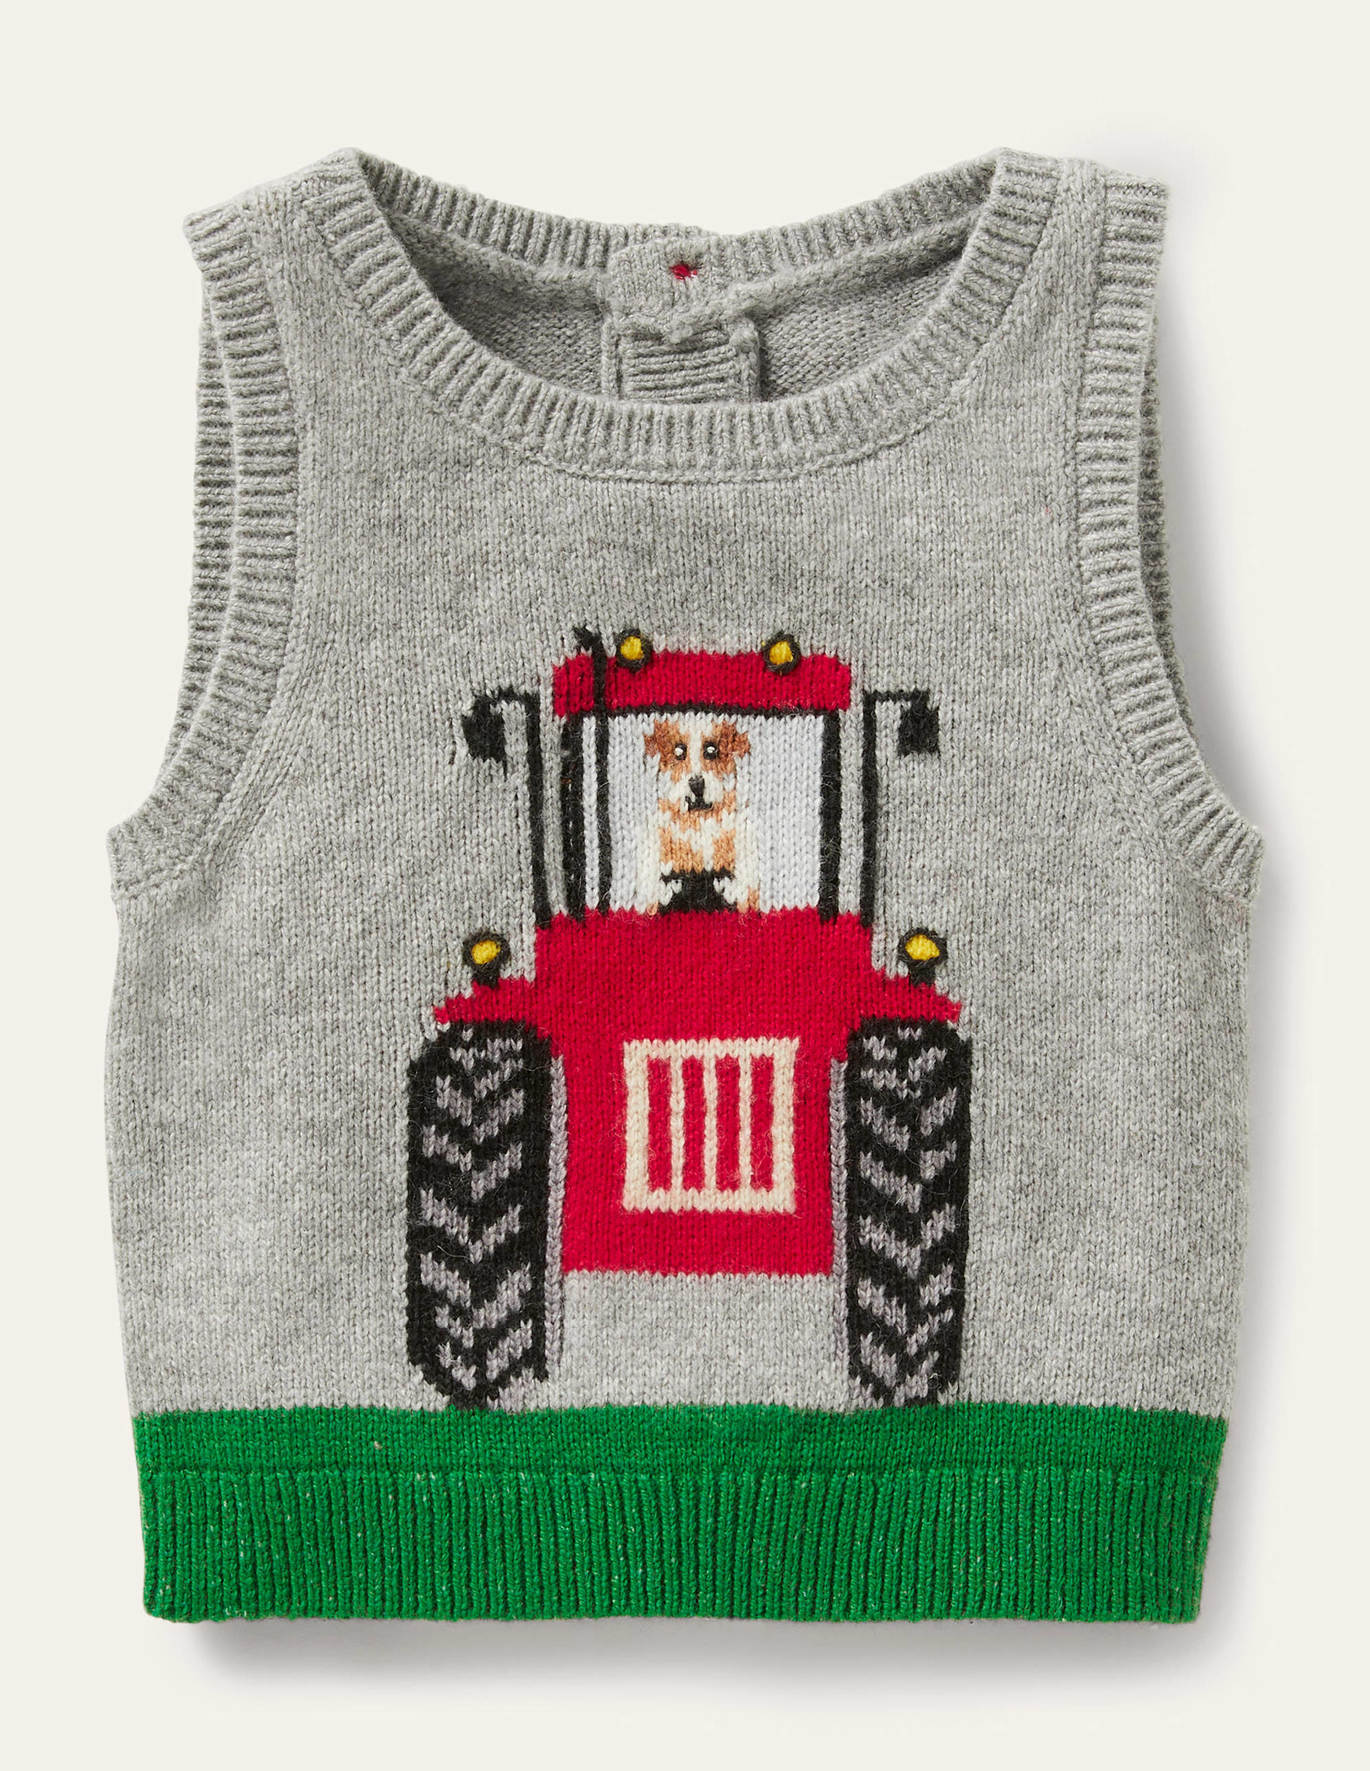 Boden Tractor Knitted Sweater Vest - Grey Marl Tractor